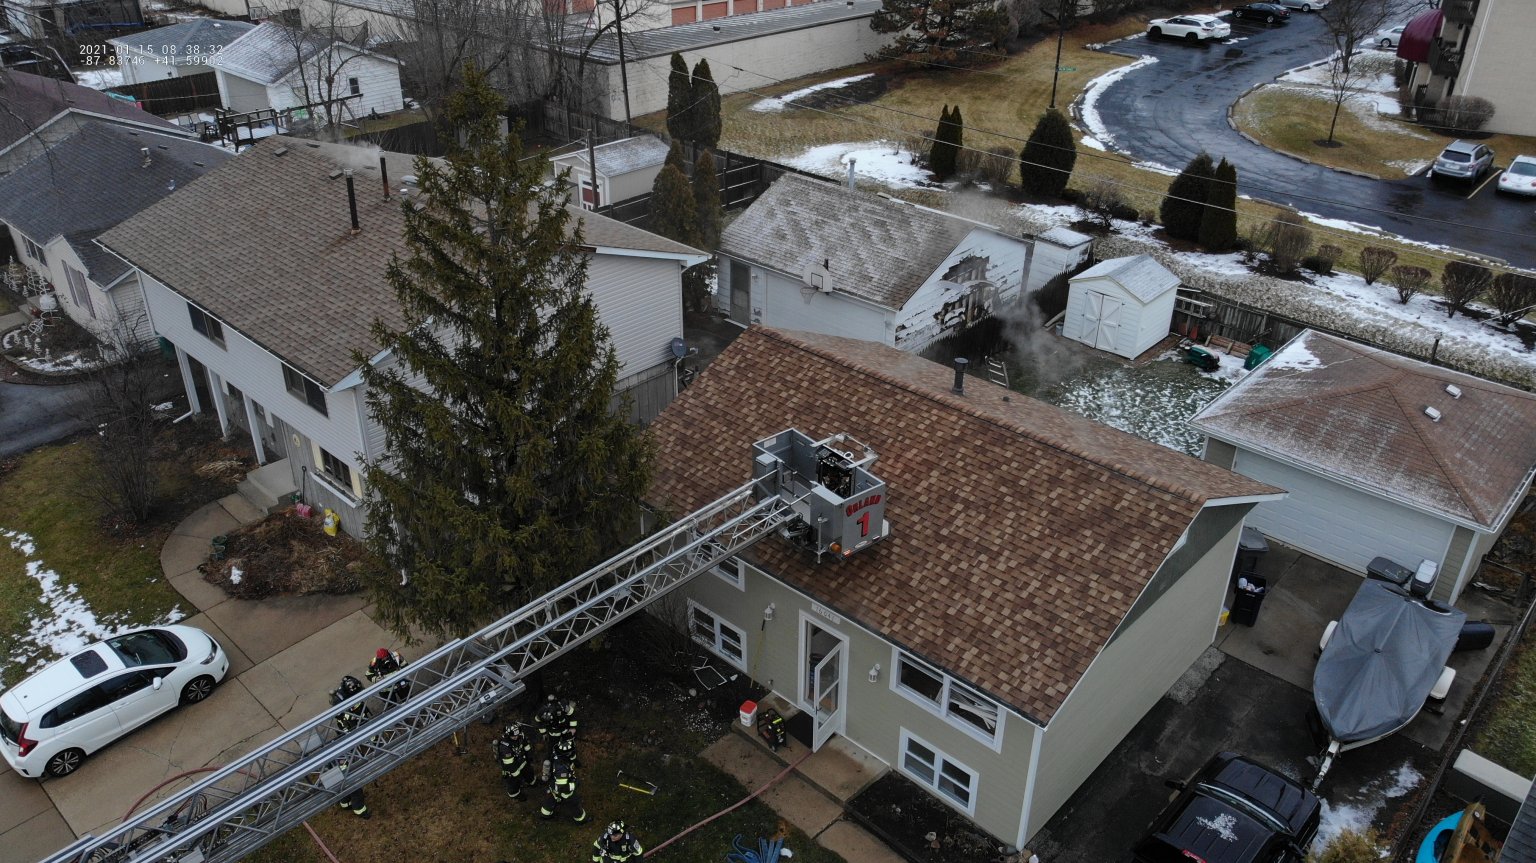 Home Fire in Orland Park no one injured Suburban Chicagoland